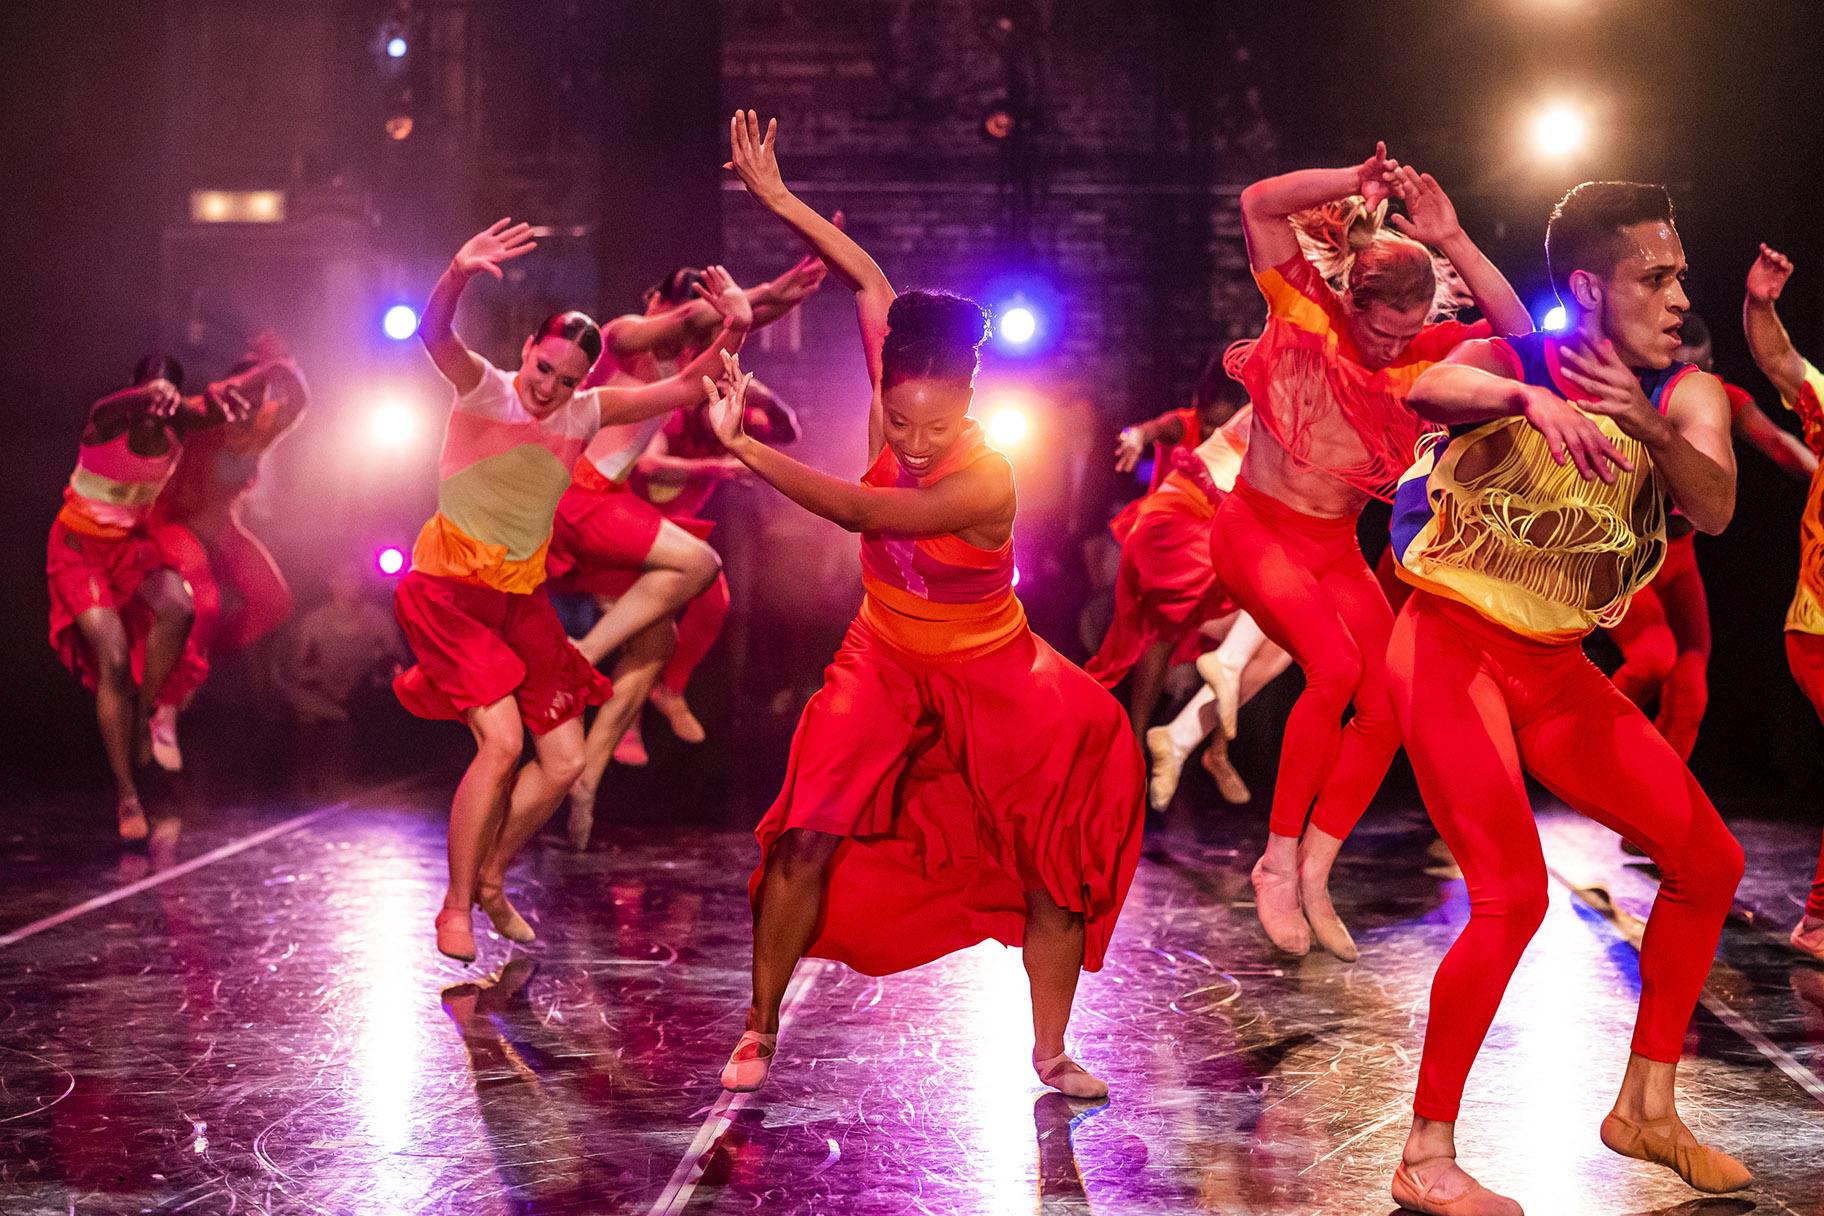 Randy Duncan’s “Release,” the finale for Dance for Life 2019. (Credit: Todd Rosenberg)